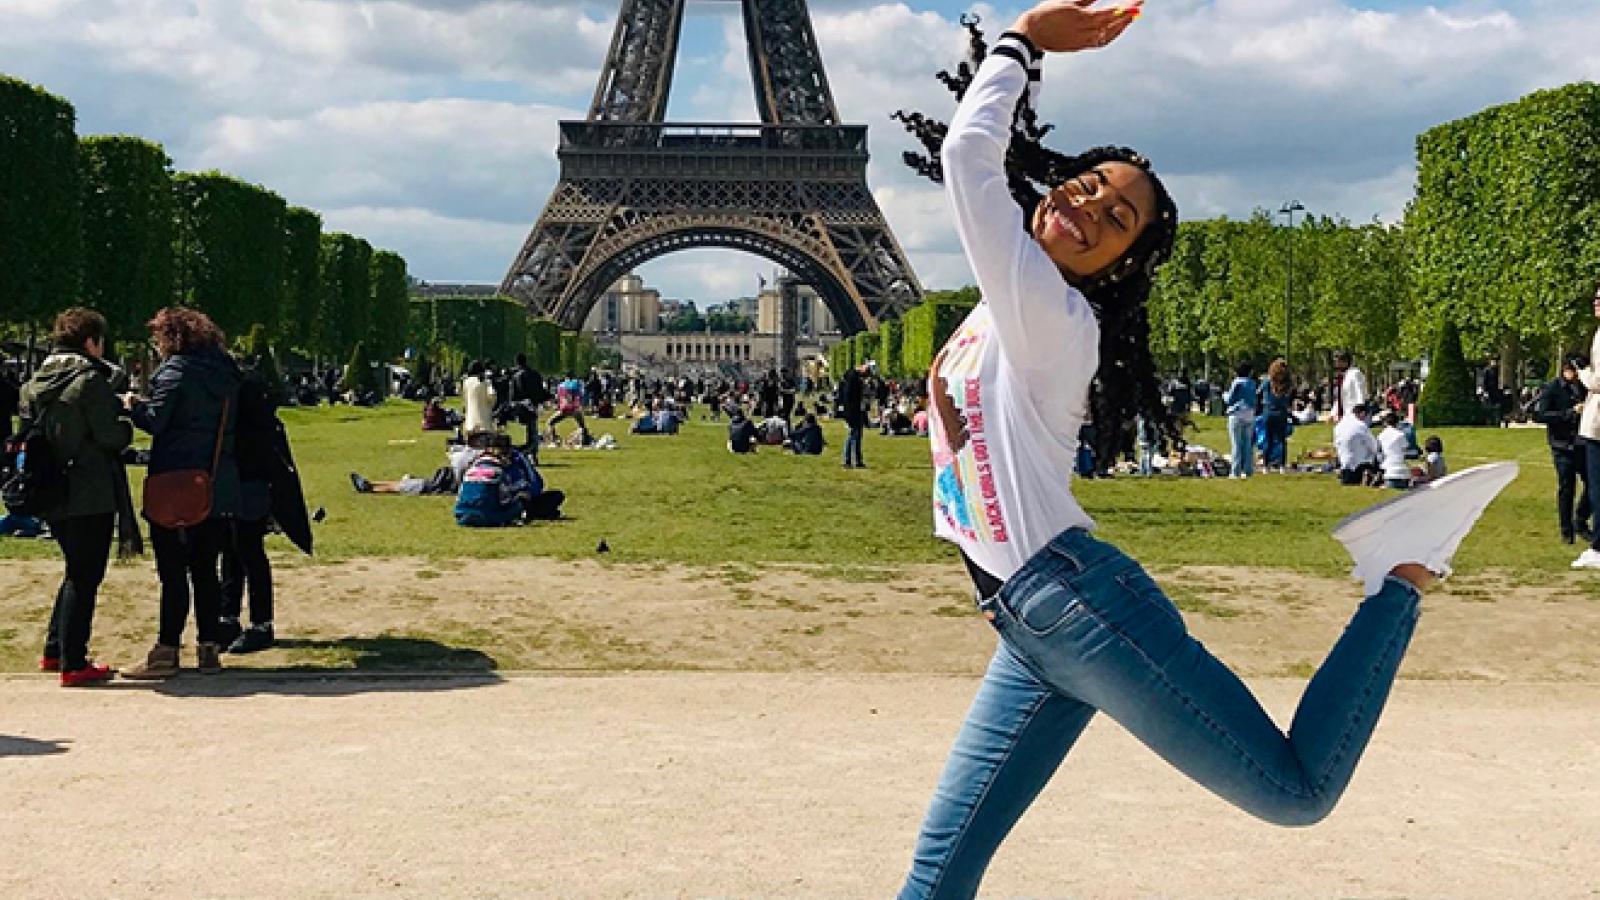 Student jumping in front of the Eiffel Tower